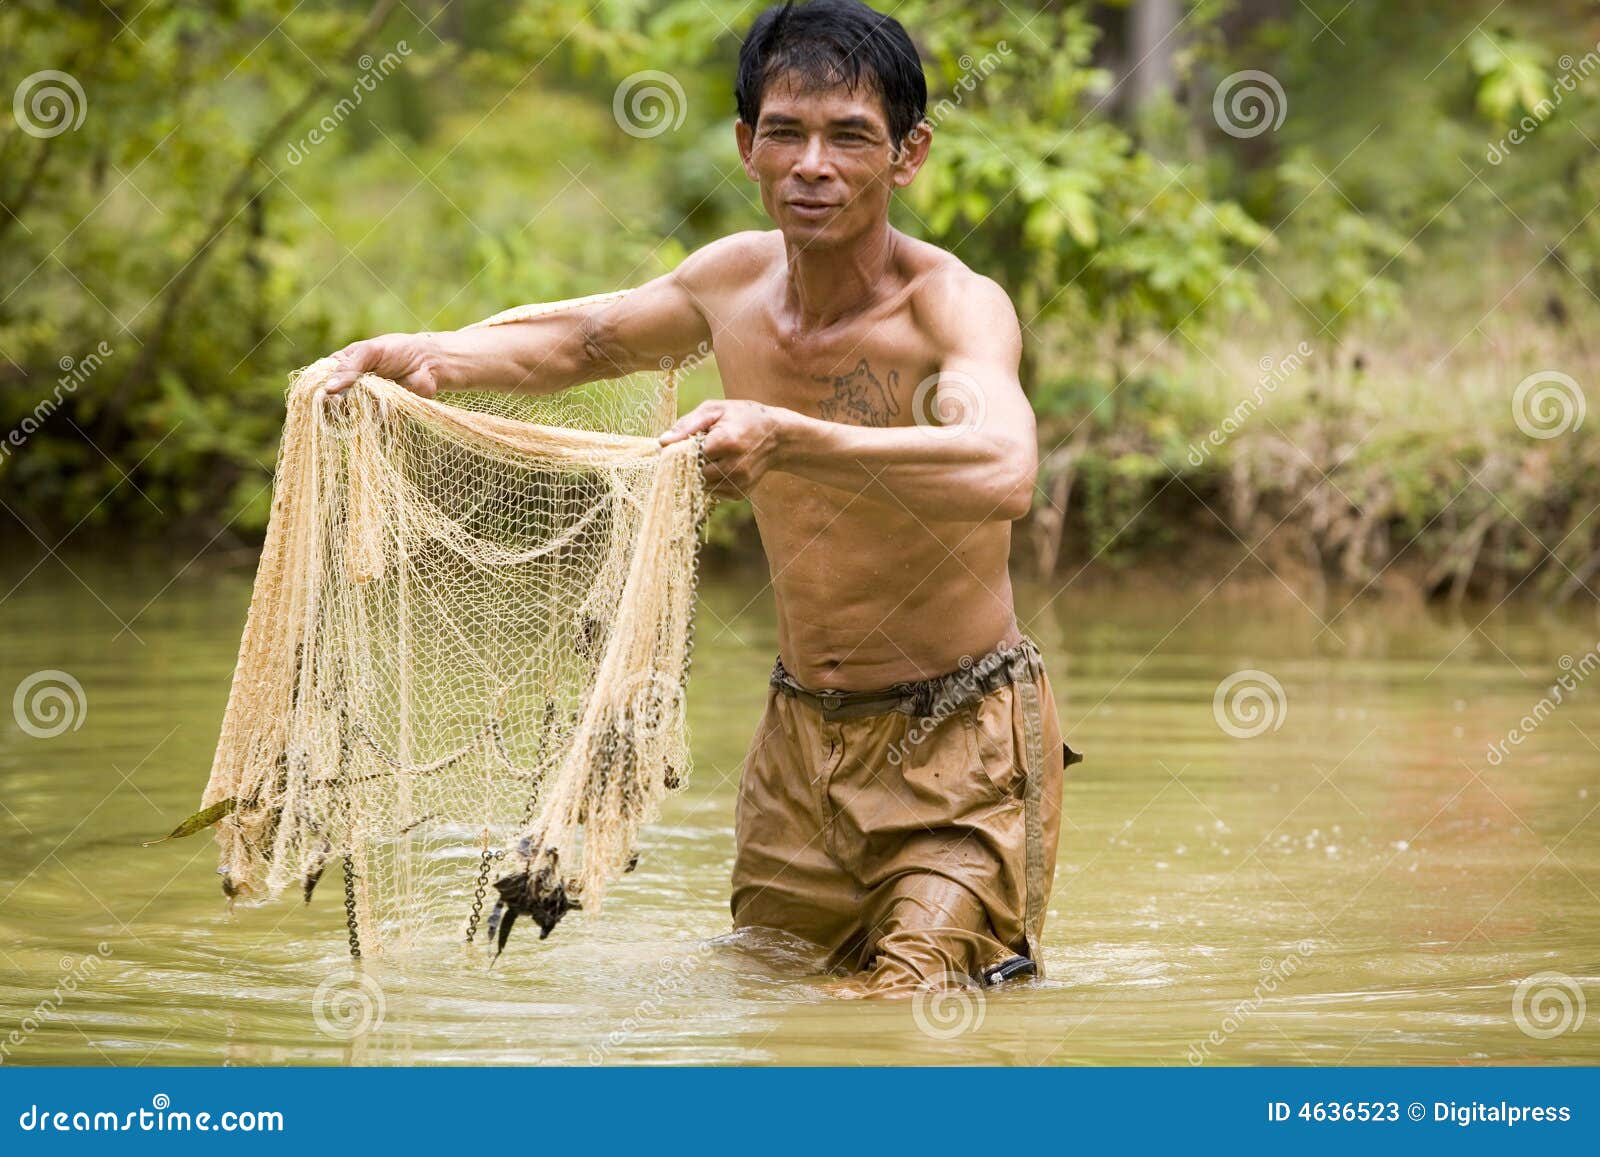 Fishing with a throw net stock image. Image of throw, thailand - 4636523